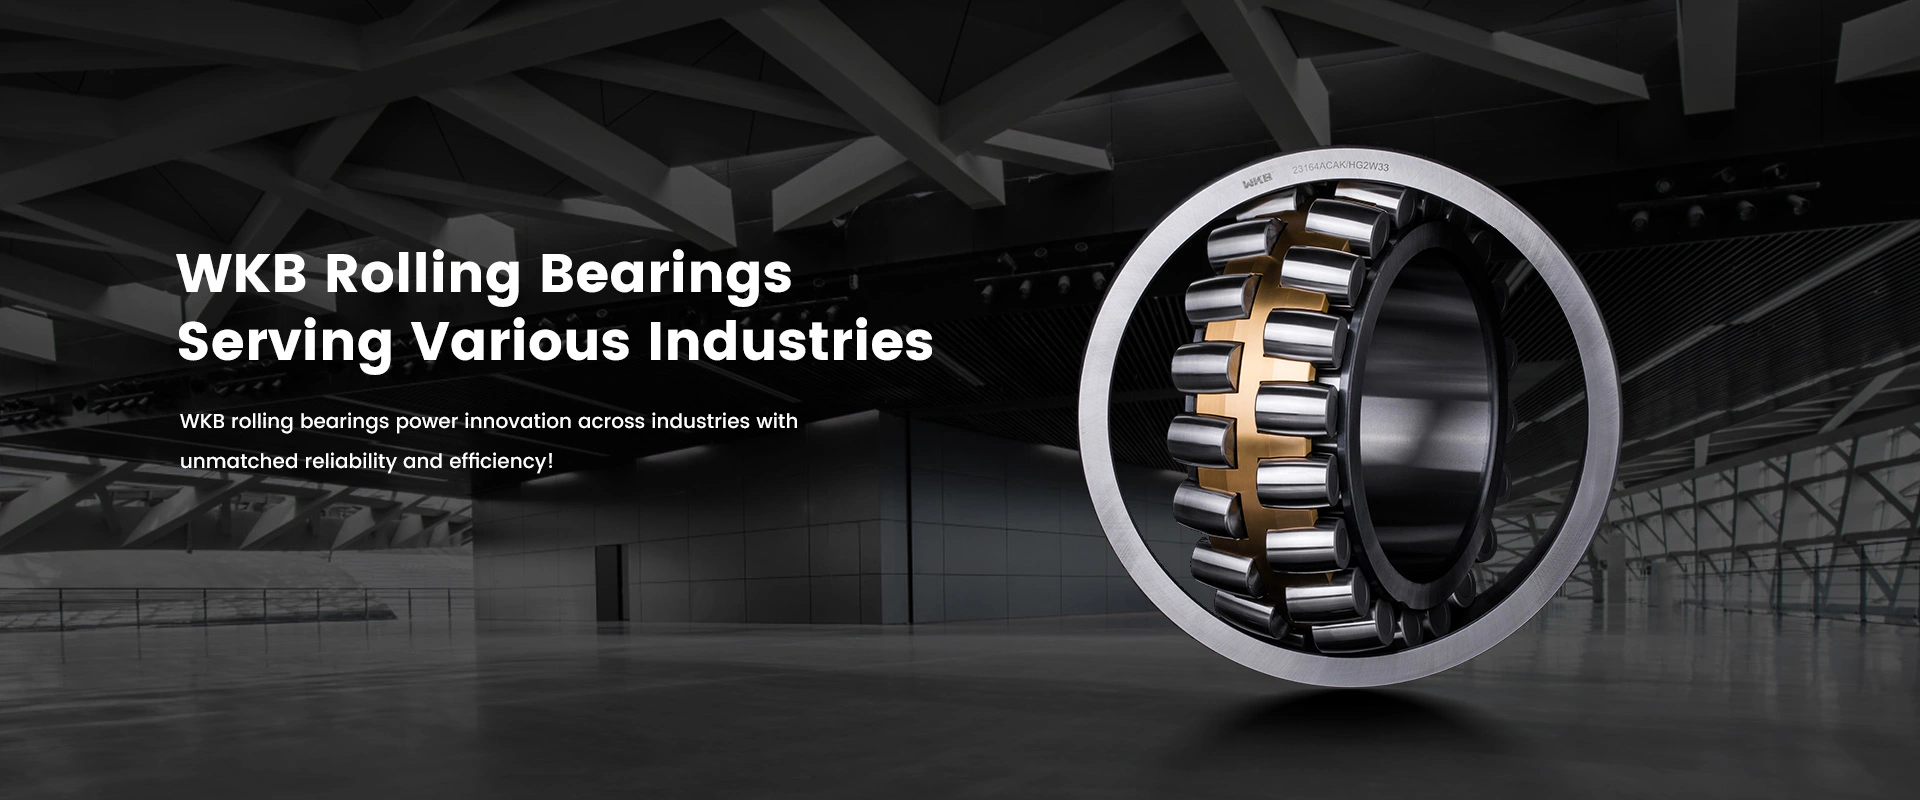 WKB rolling bearings power innovation across industries with unmatched reliability and efficiency!